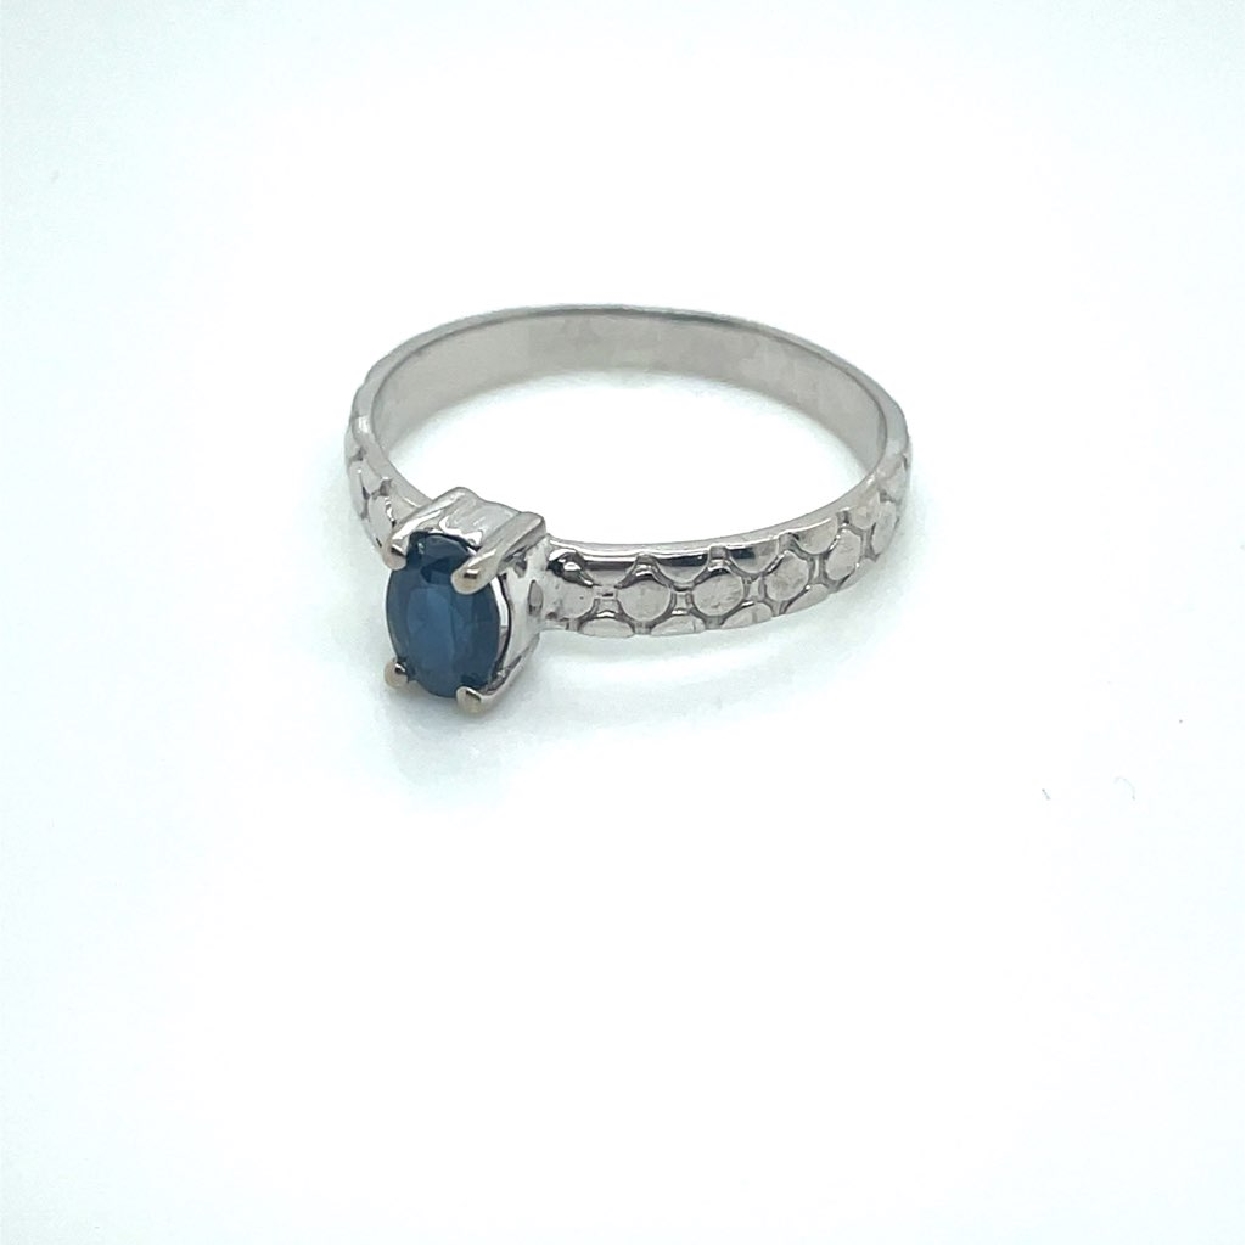 10K White Gold Sapphire Ring with Engravings Size 8